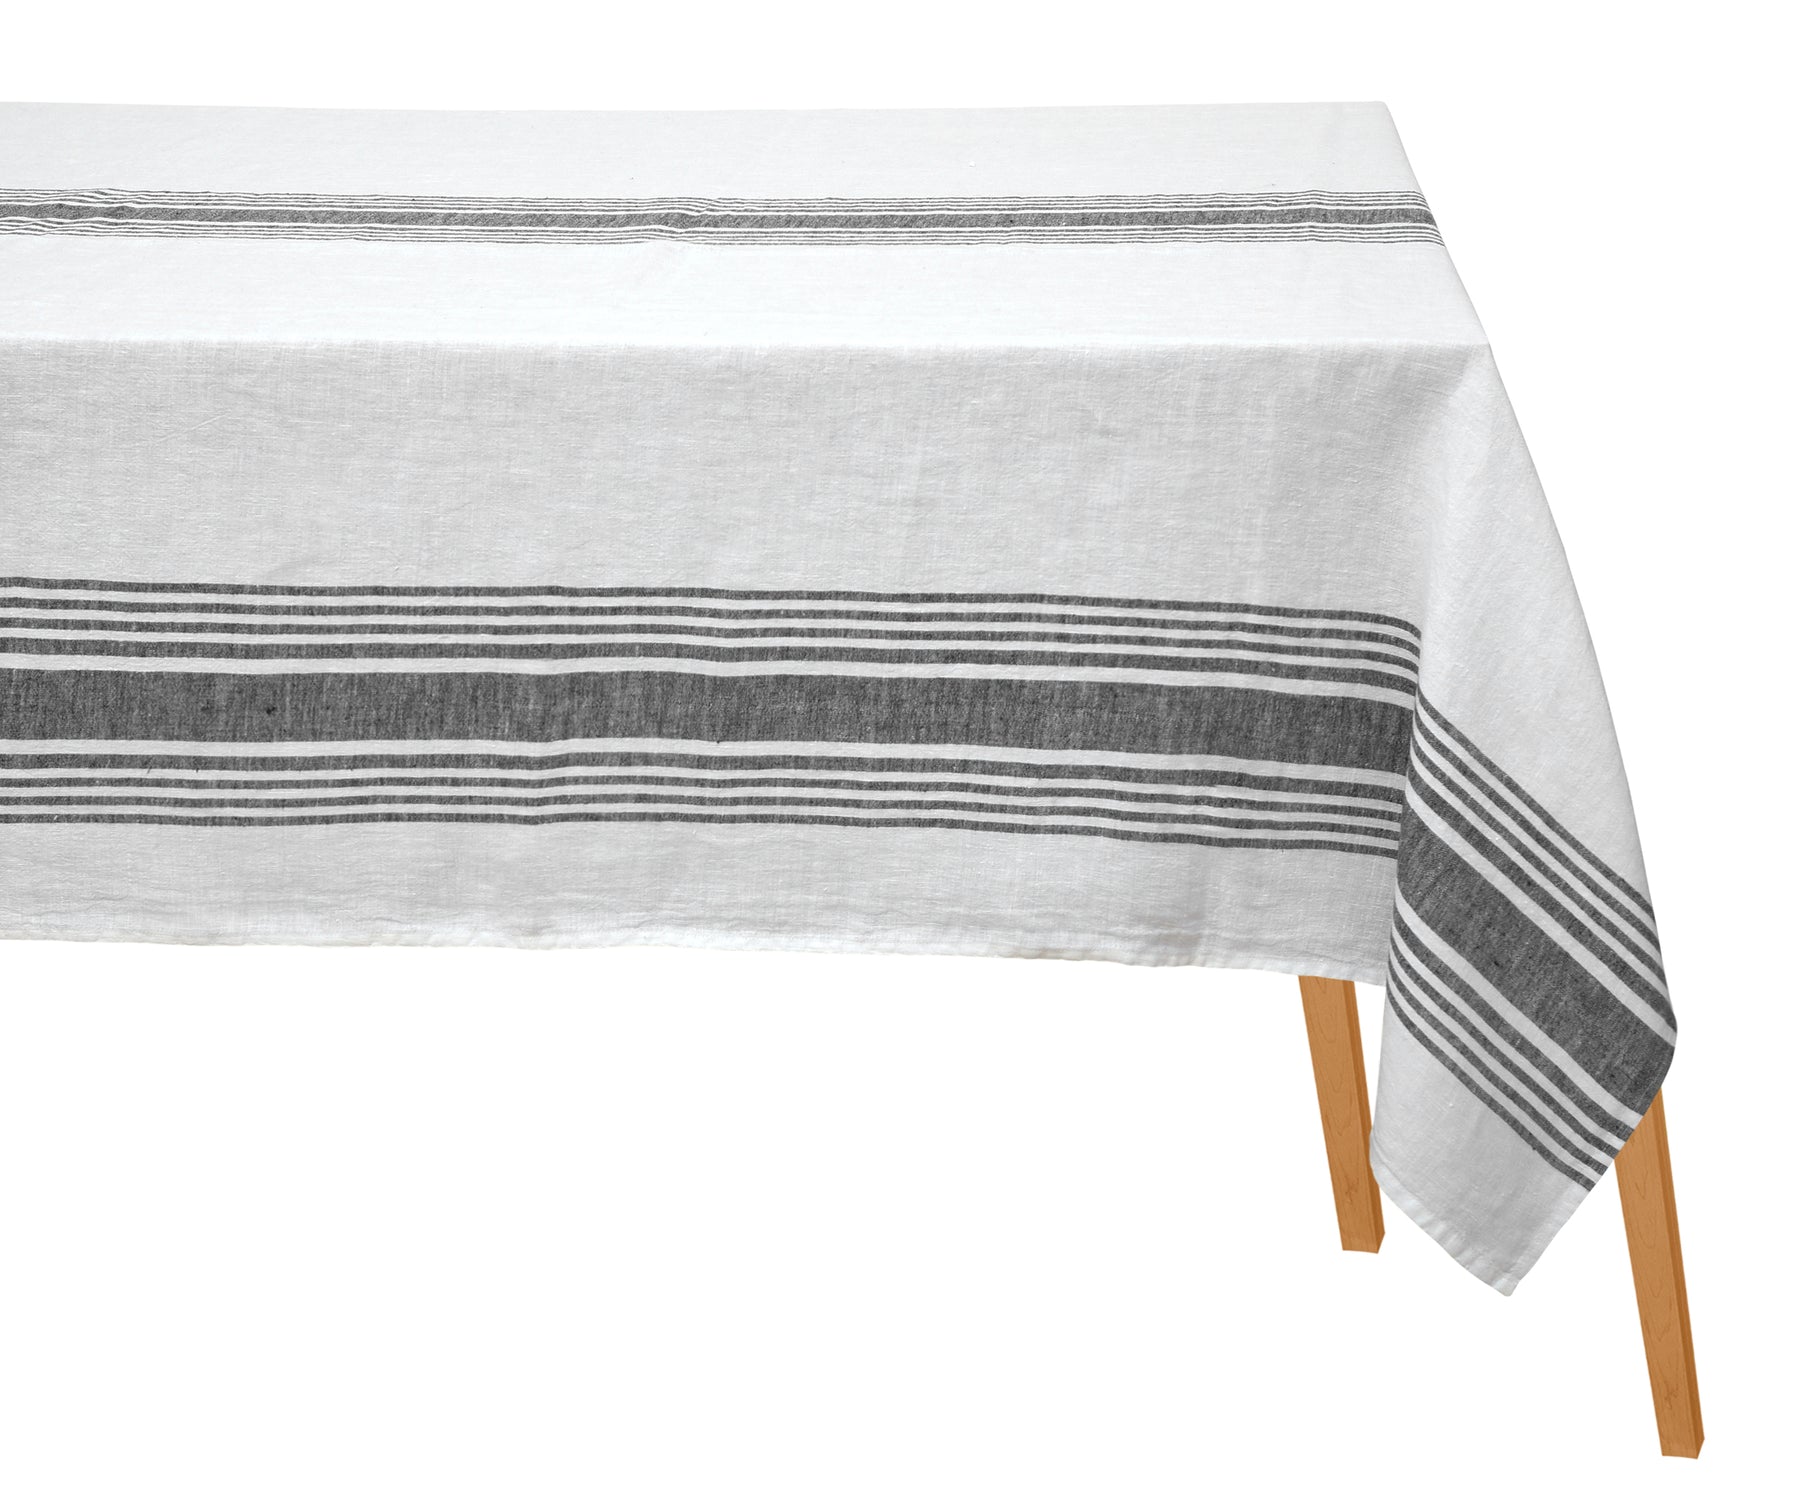 Sophisticated table setting with a white linen and black striped tablecloth